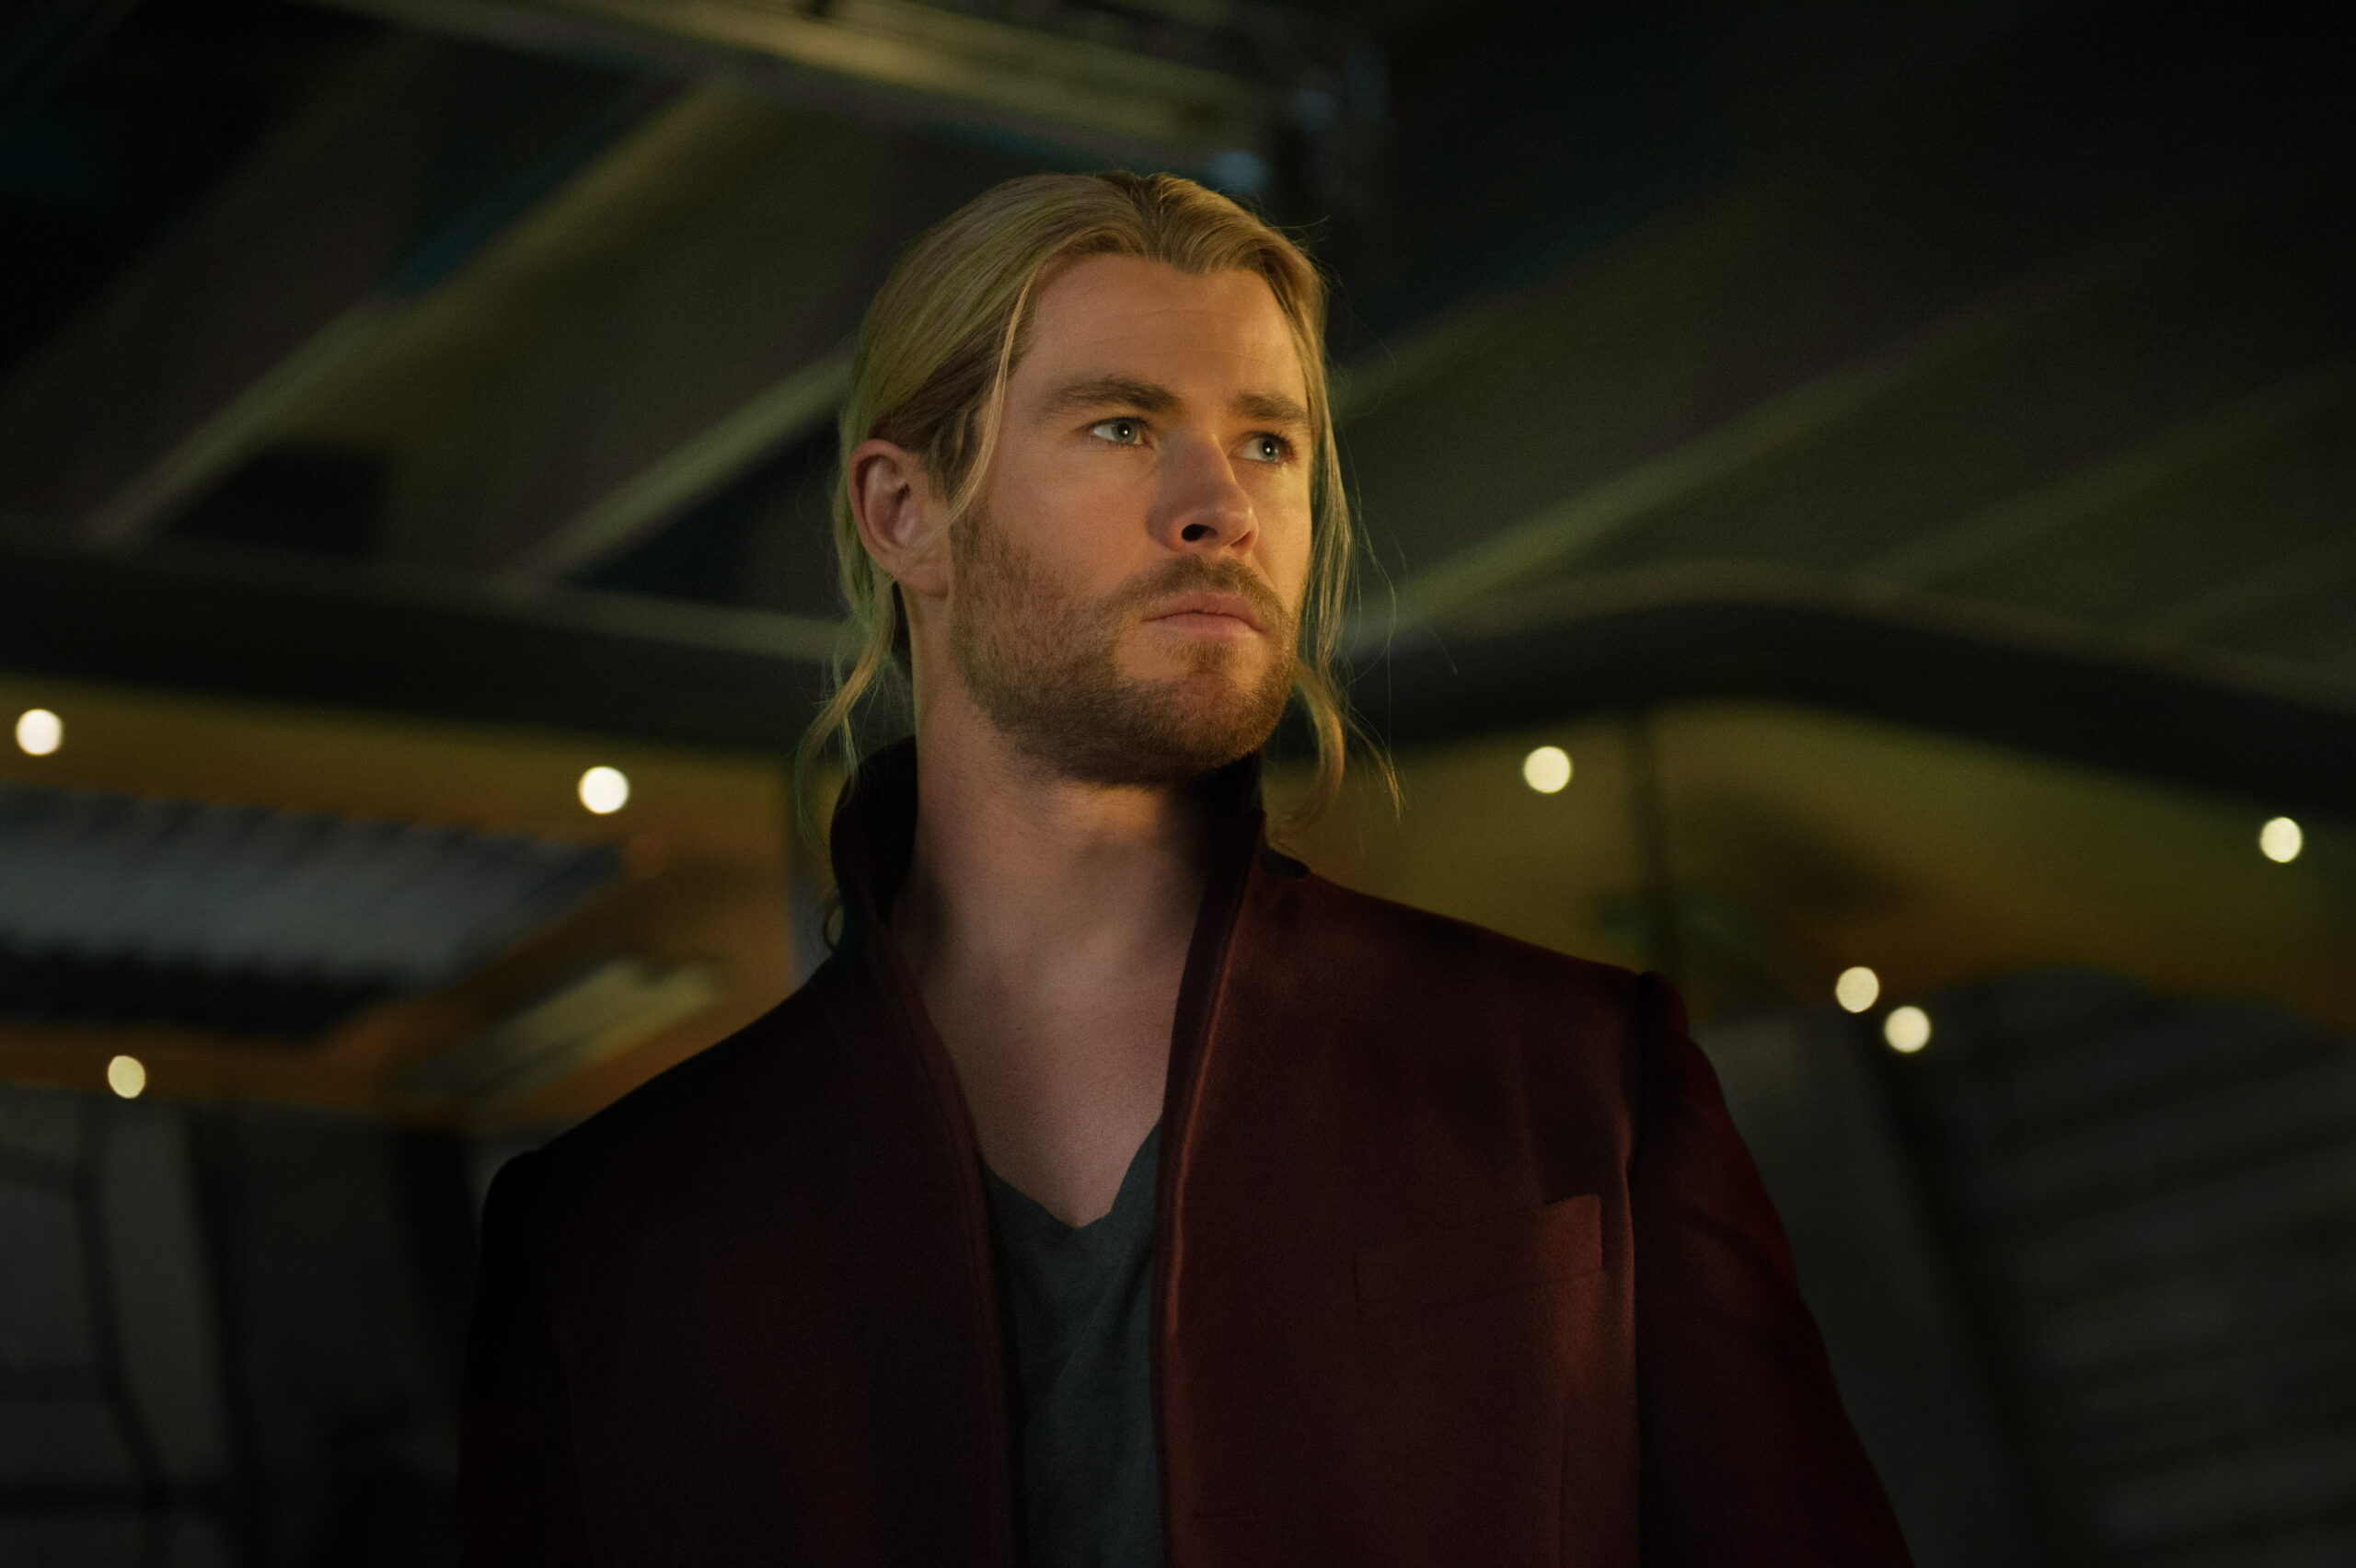 avengers age of ultron the avengers thor chris hemsworth wallpaper 44ac67bb15f0a4718ec079216bb34856 scaled